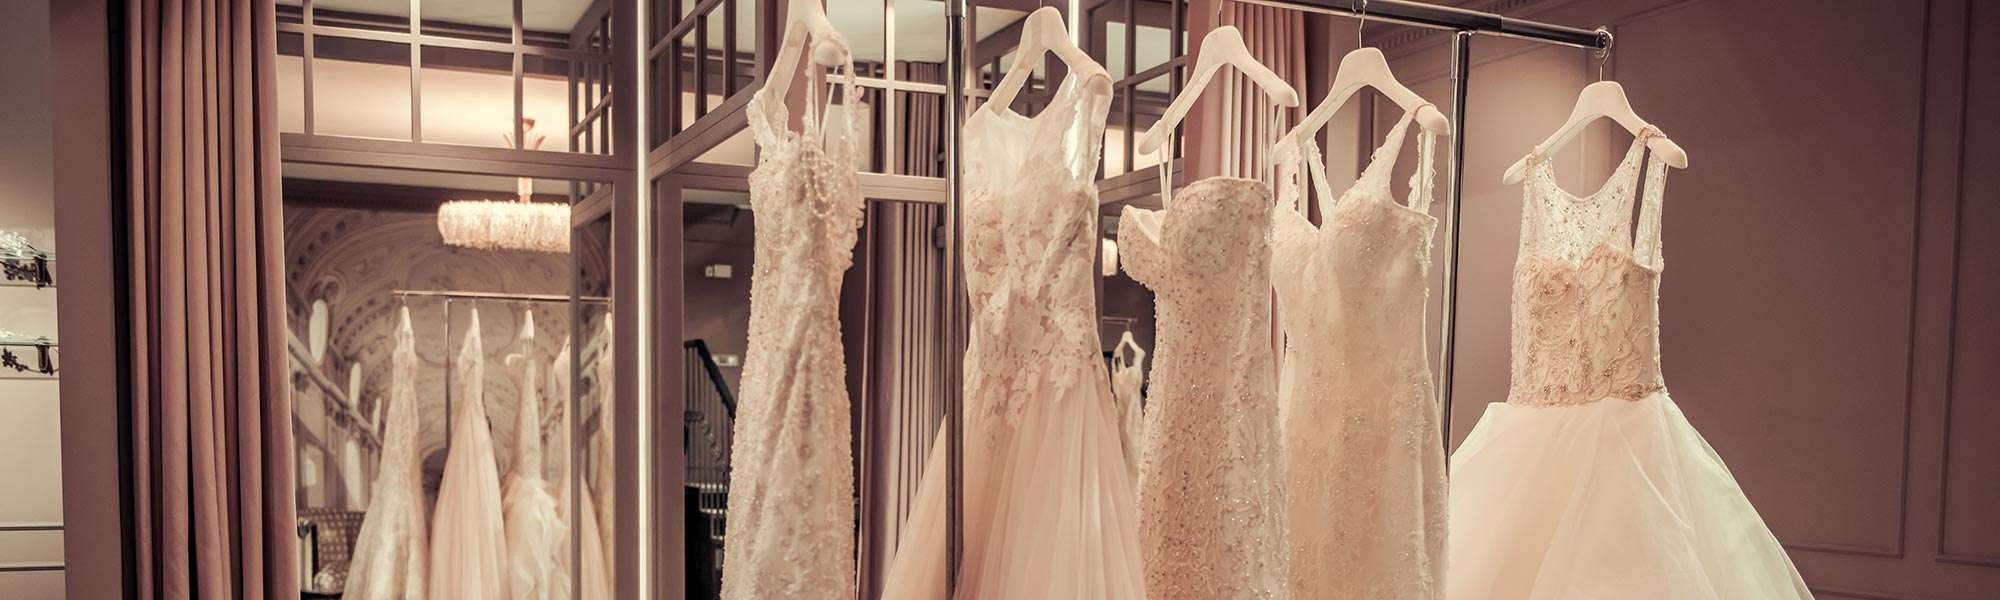 Local Bridal Gown Shops